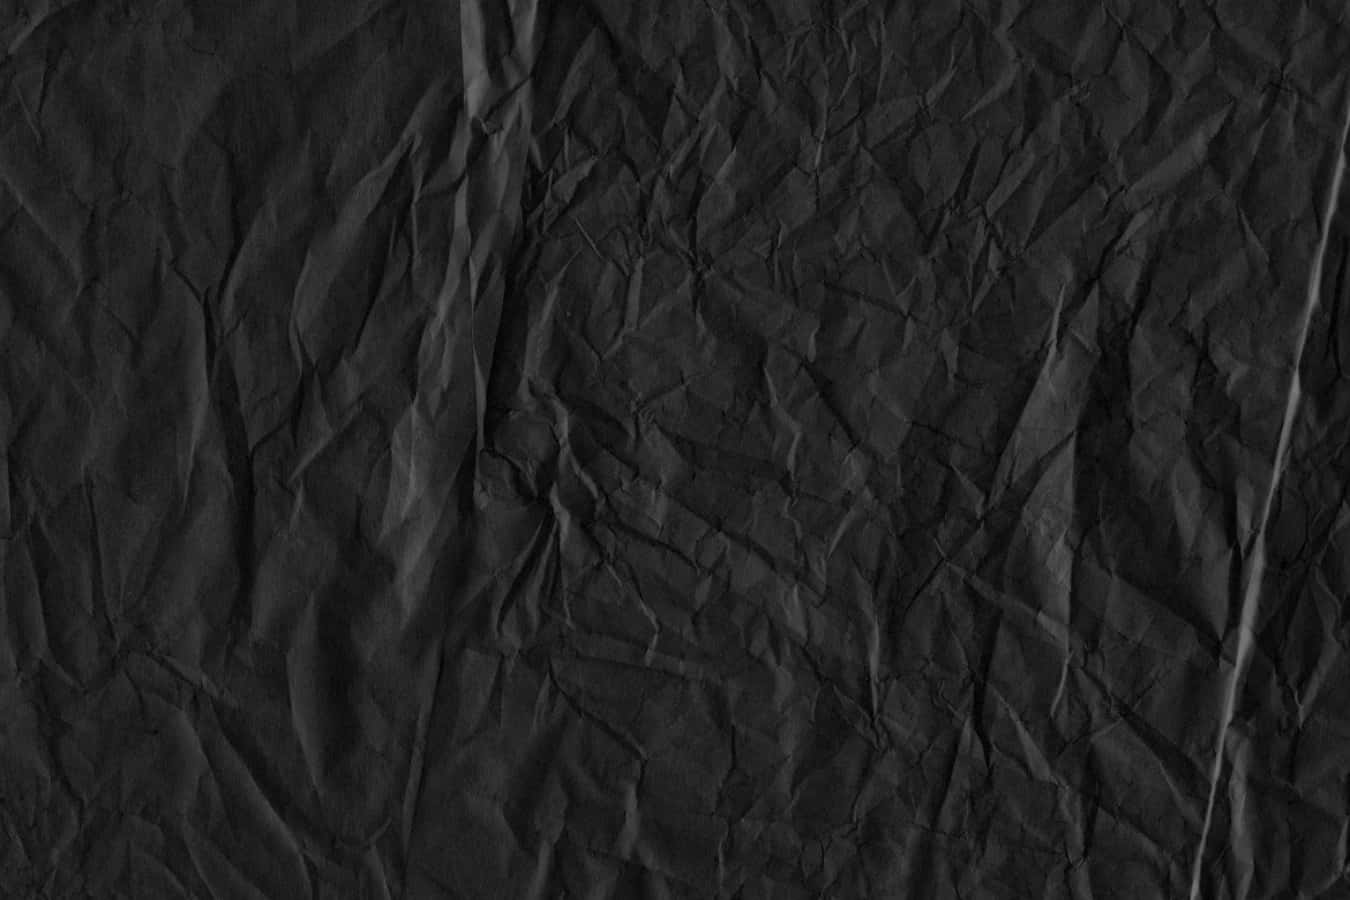 Black paper texture with intricate patterns